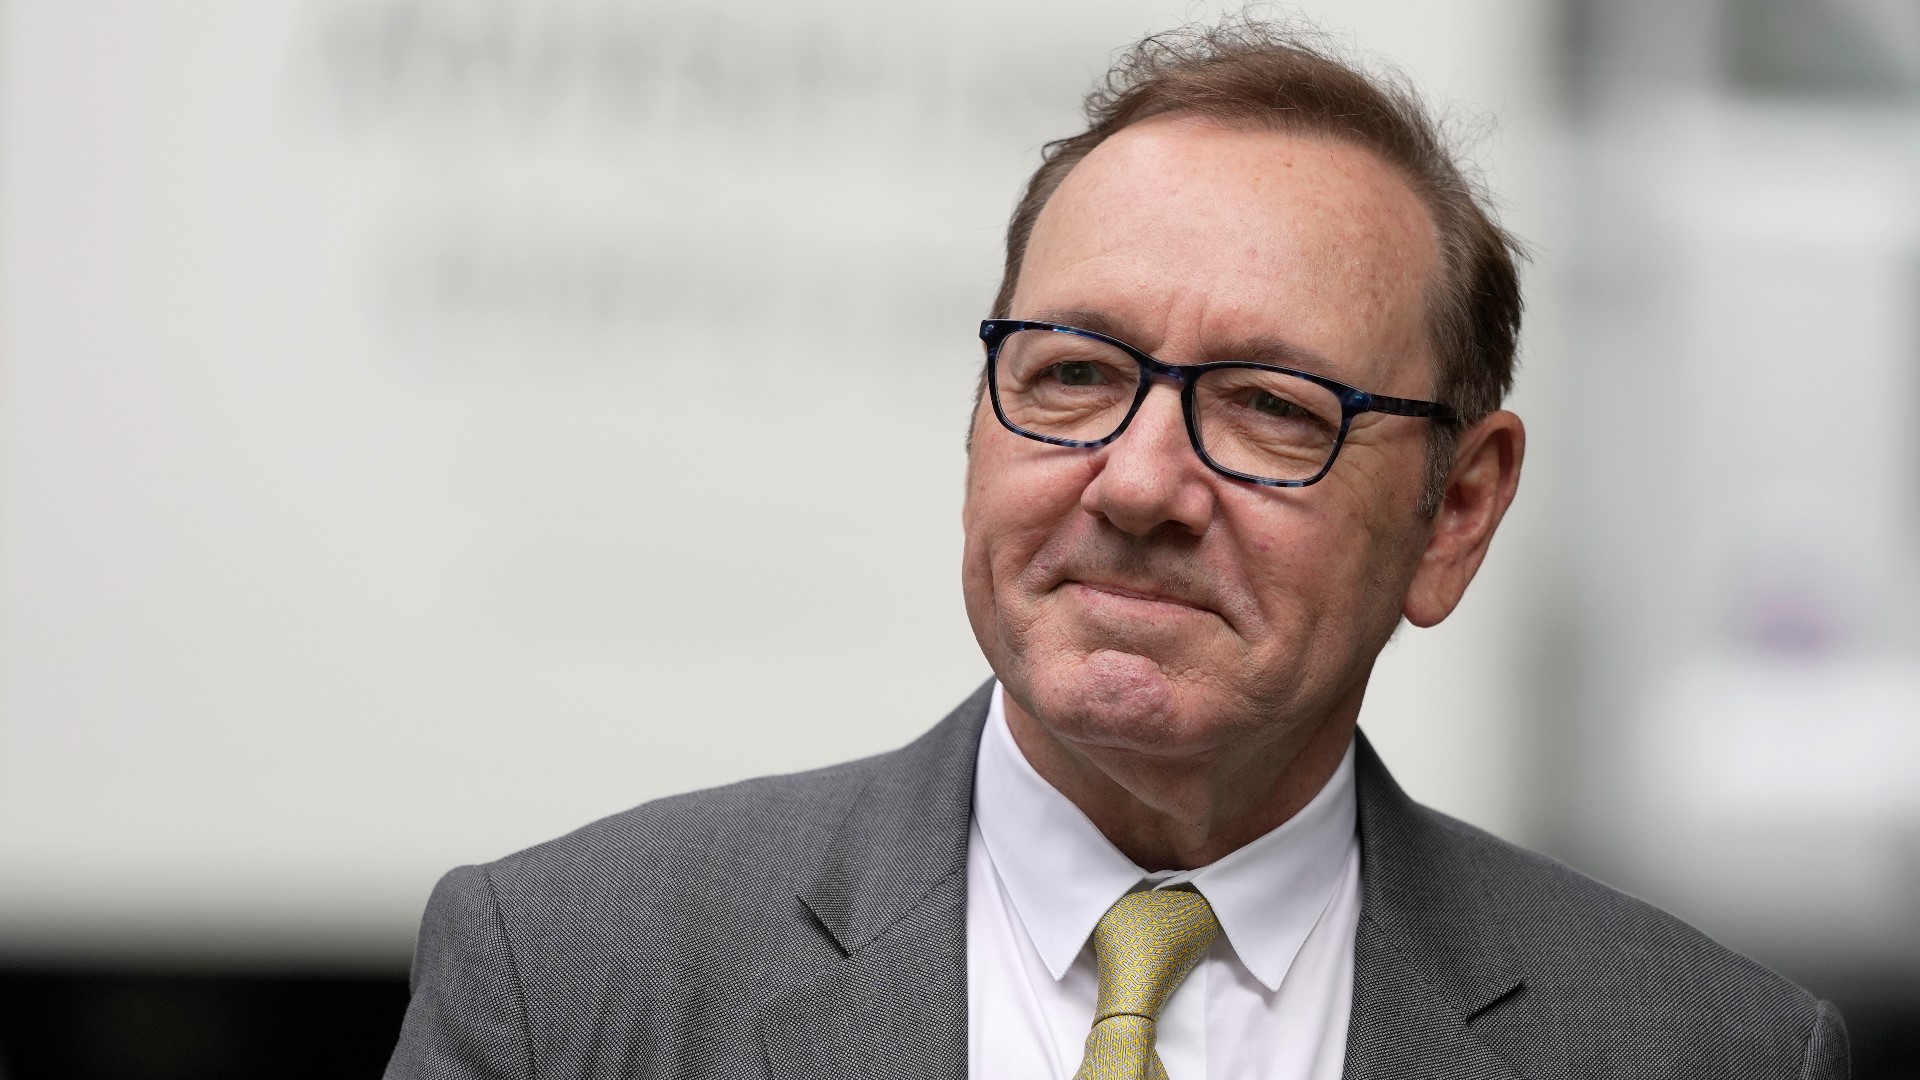 Spacey viewed the case as a chance for redemption, telling a magazine last month there were people ready to hire him "the moment" he was cleared of the charges.